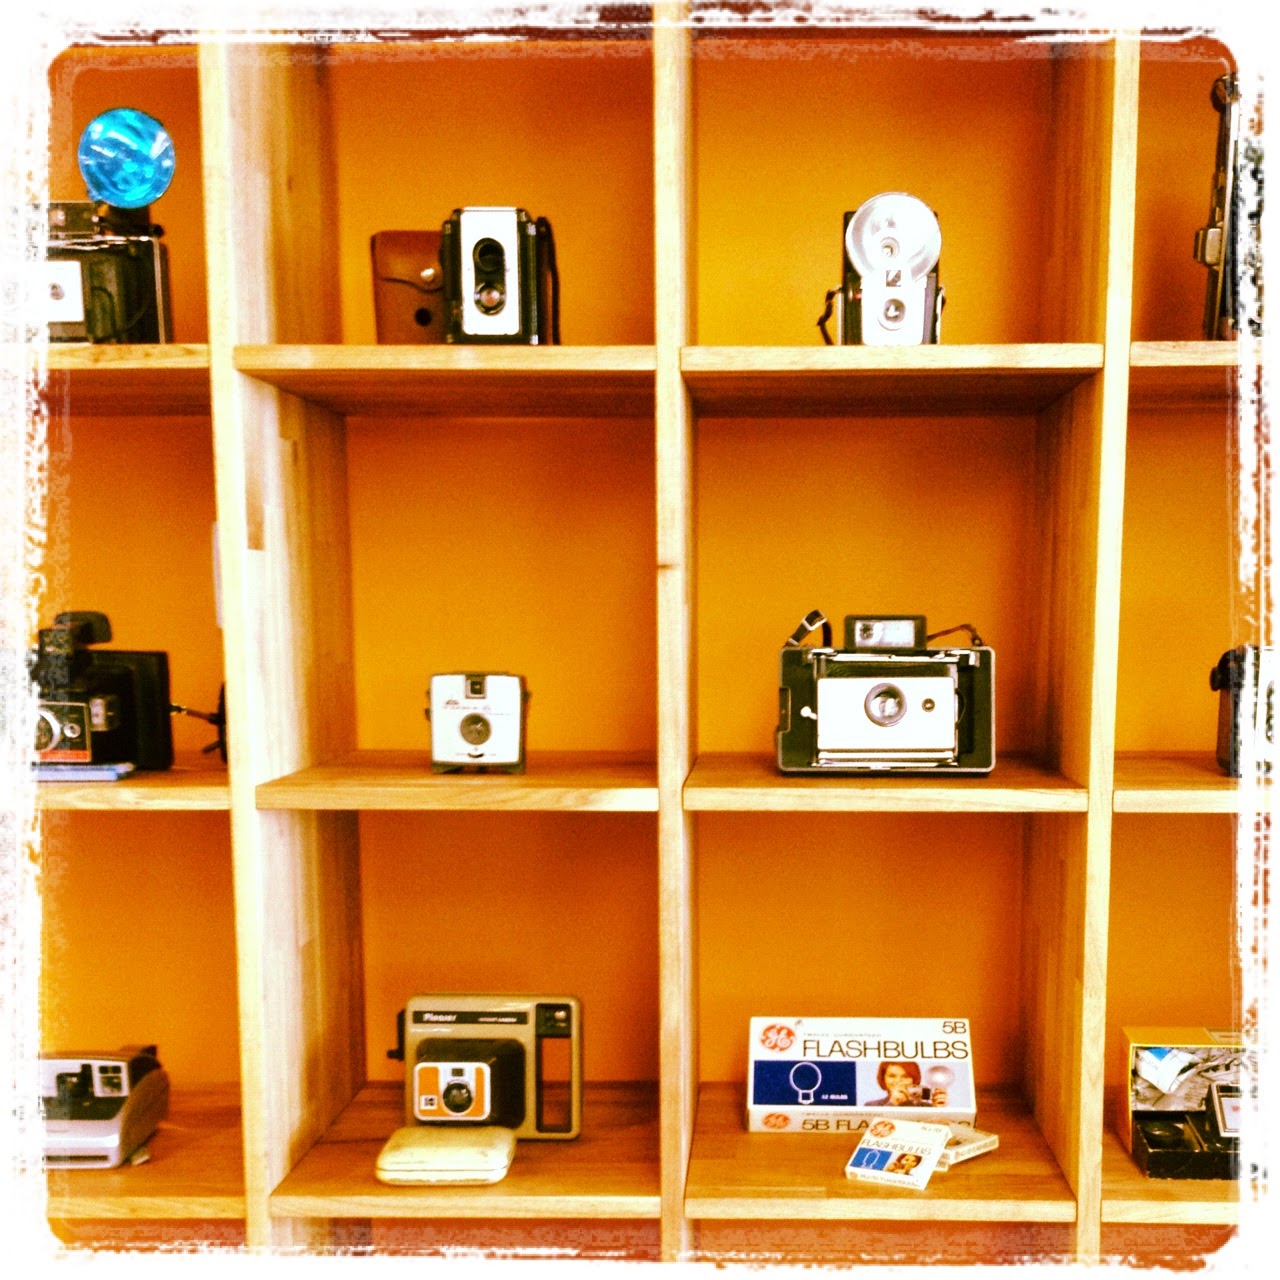 A collection of cameras on a shelf